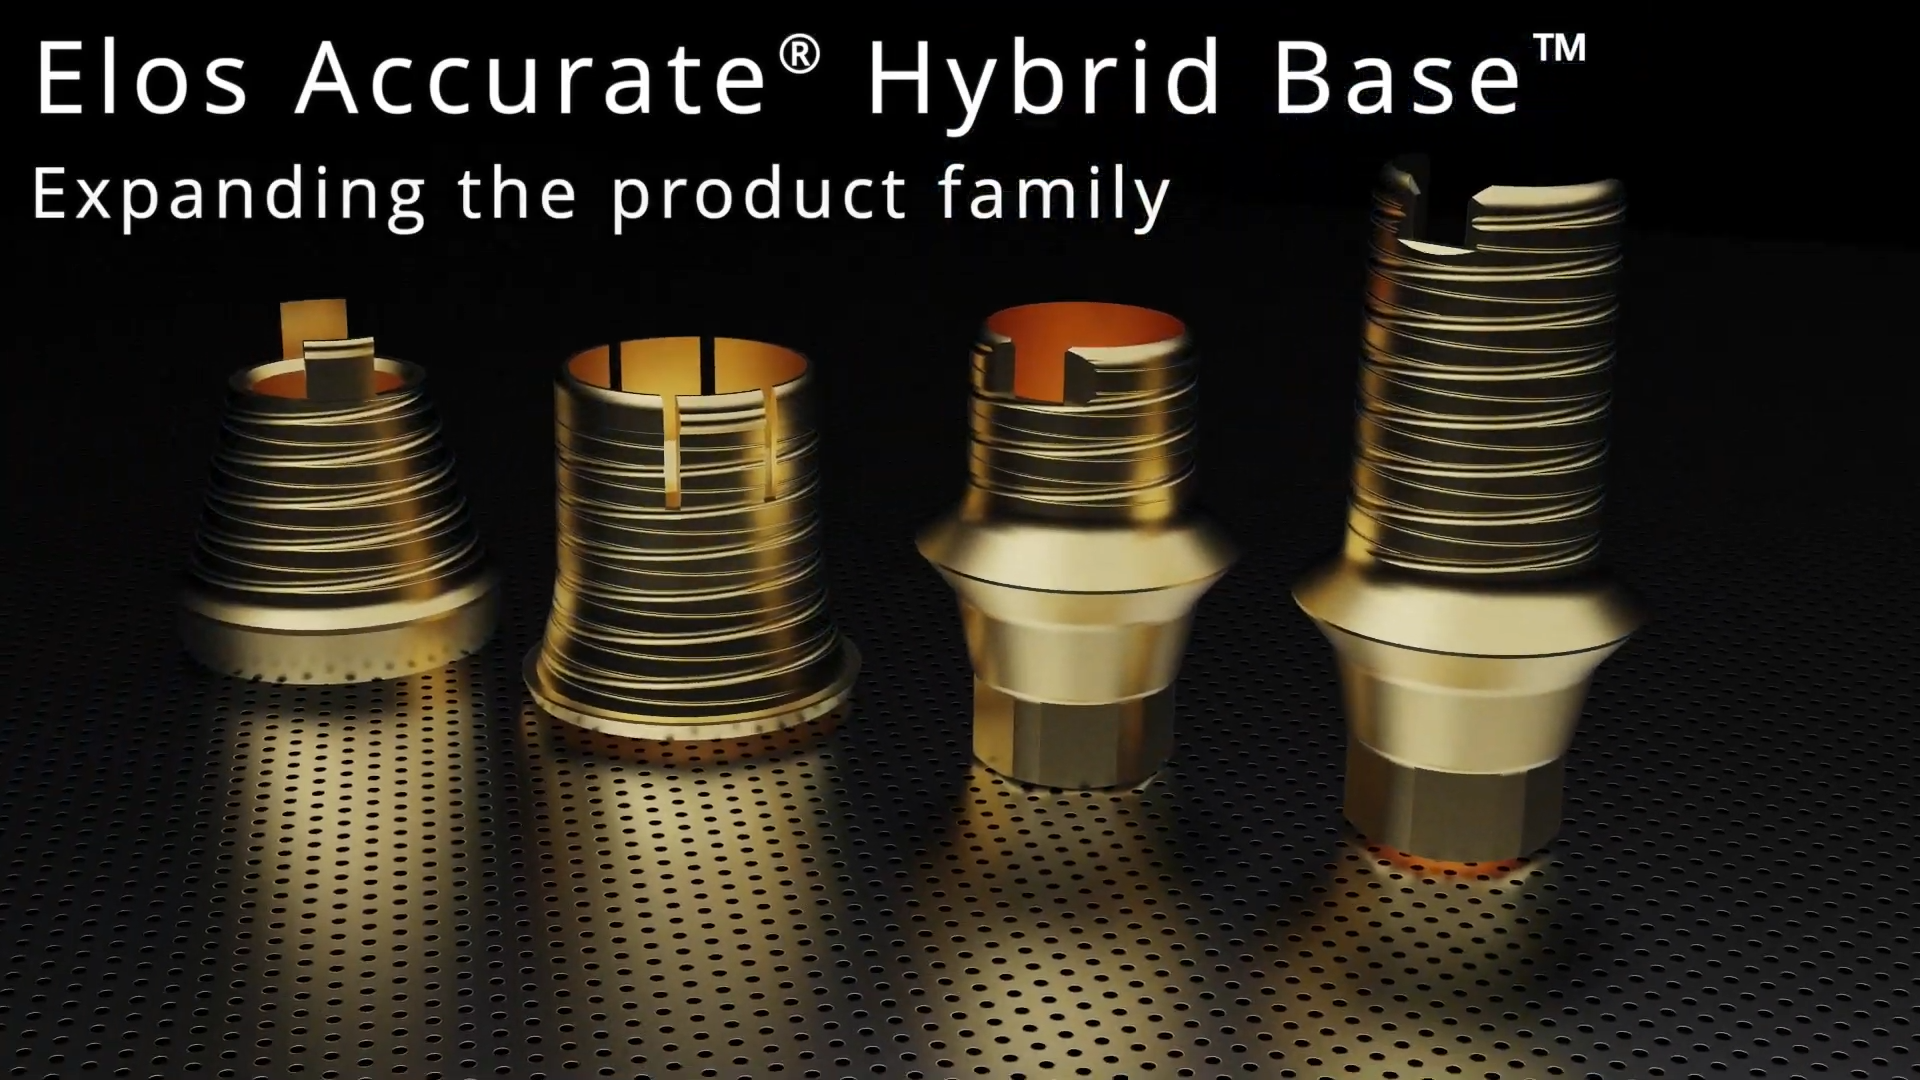 Elos Accurate® Hybrid Base™ is now available in Canada!